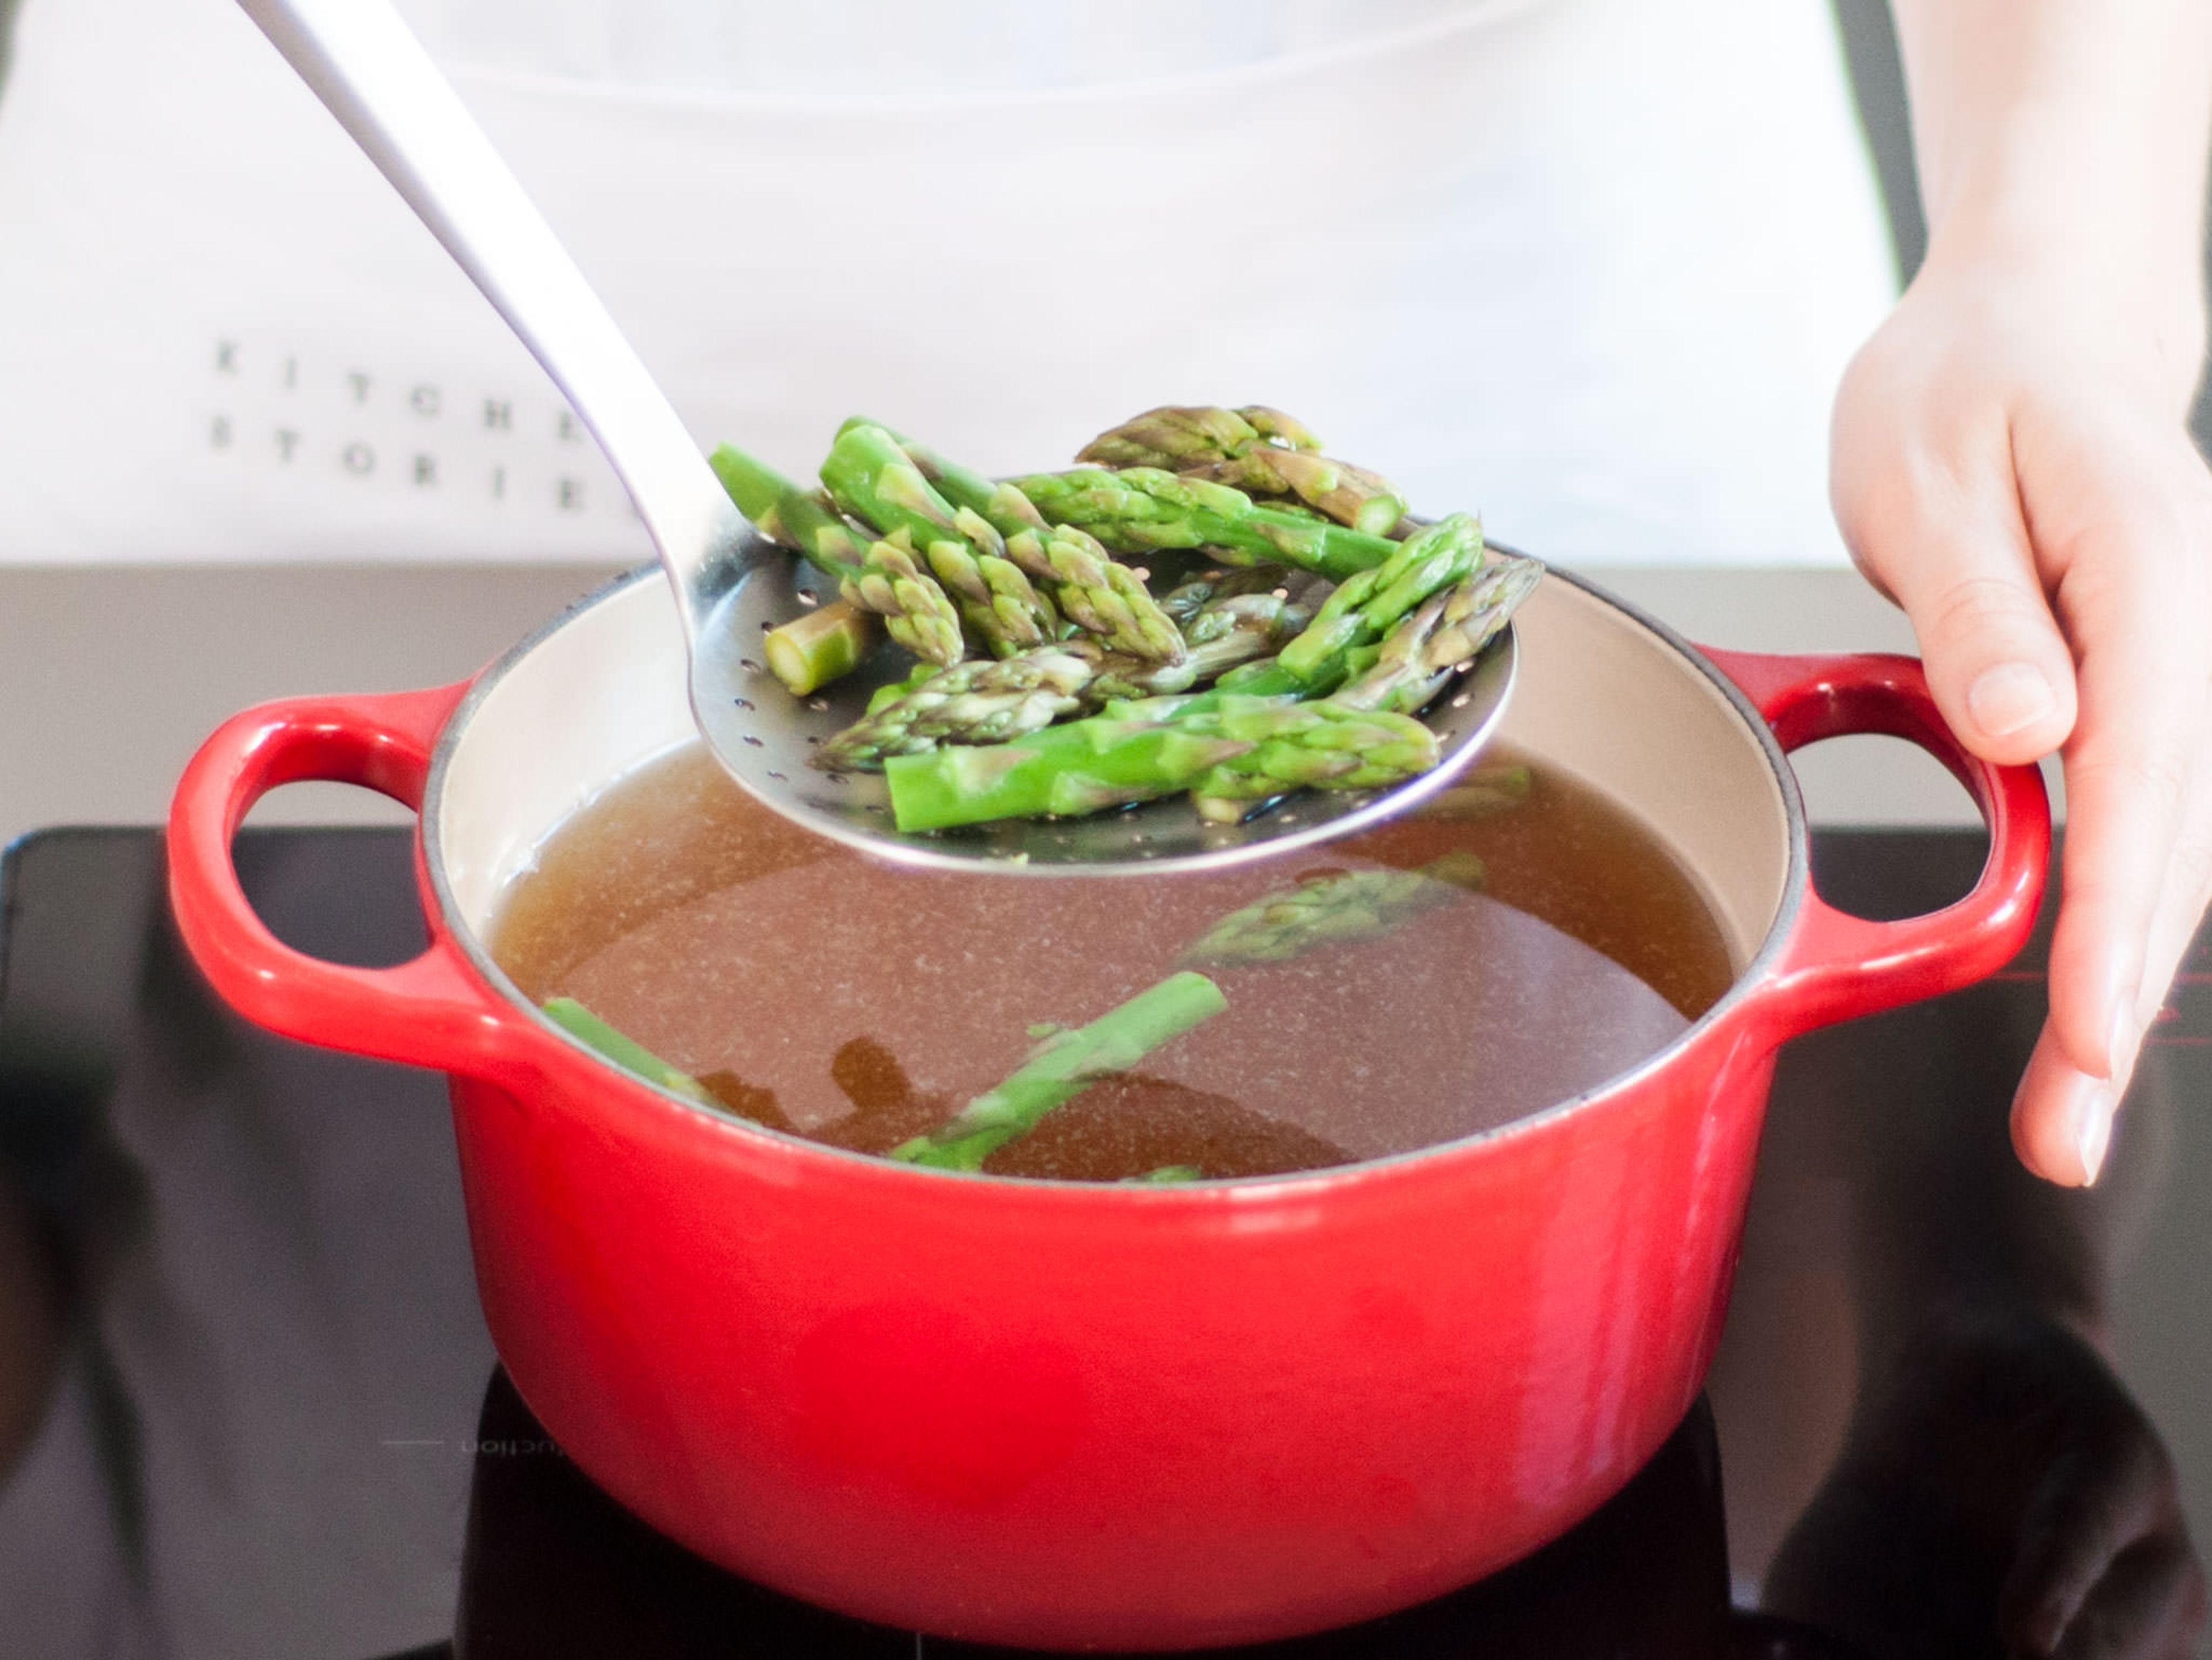 Bring stock to a boil, then add asparagus stalks and cook for approx. 2 - 3 min. Remove asparagus with a slotted spoon and transfer to an ice bath. Drain and set aside on a paper towel-lined plate. Repeat with tips.